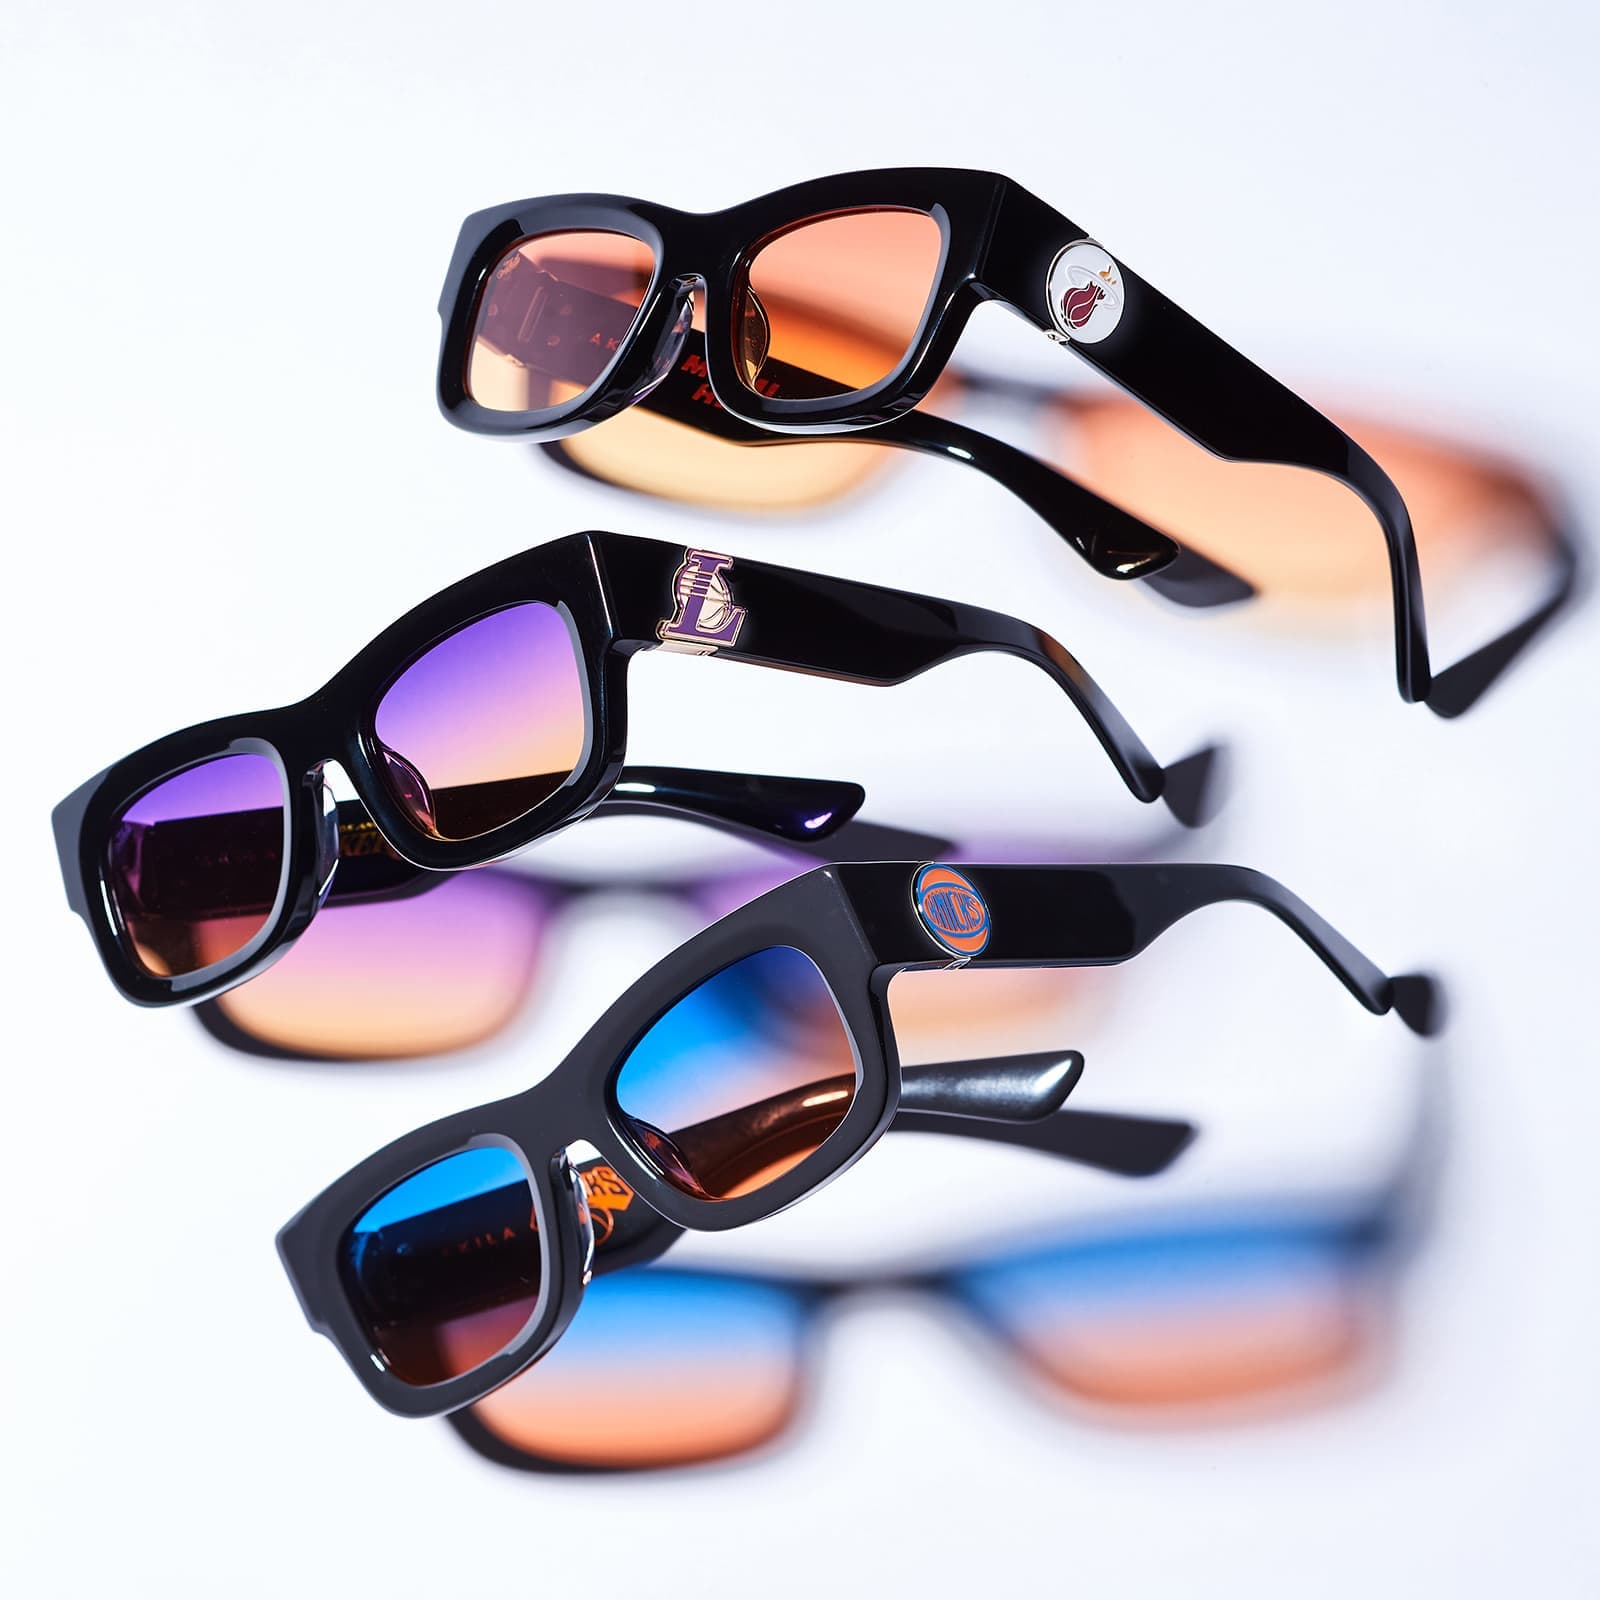 AKILA's sunglasses in collaboration with the NBA are hot! 3